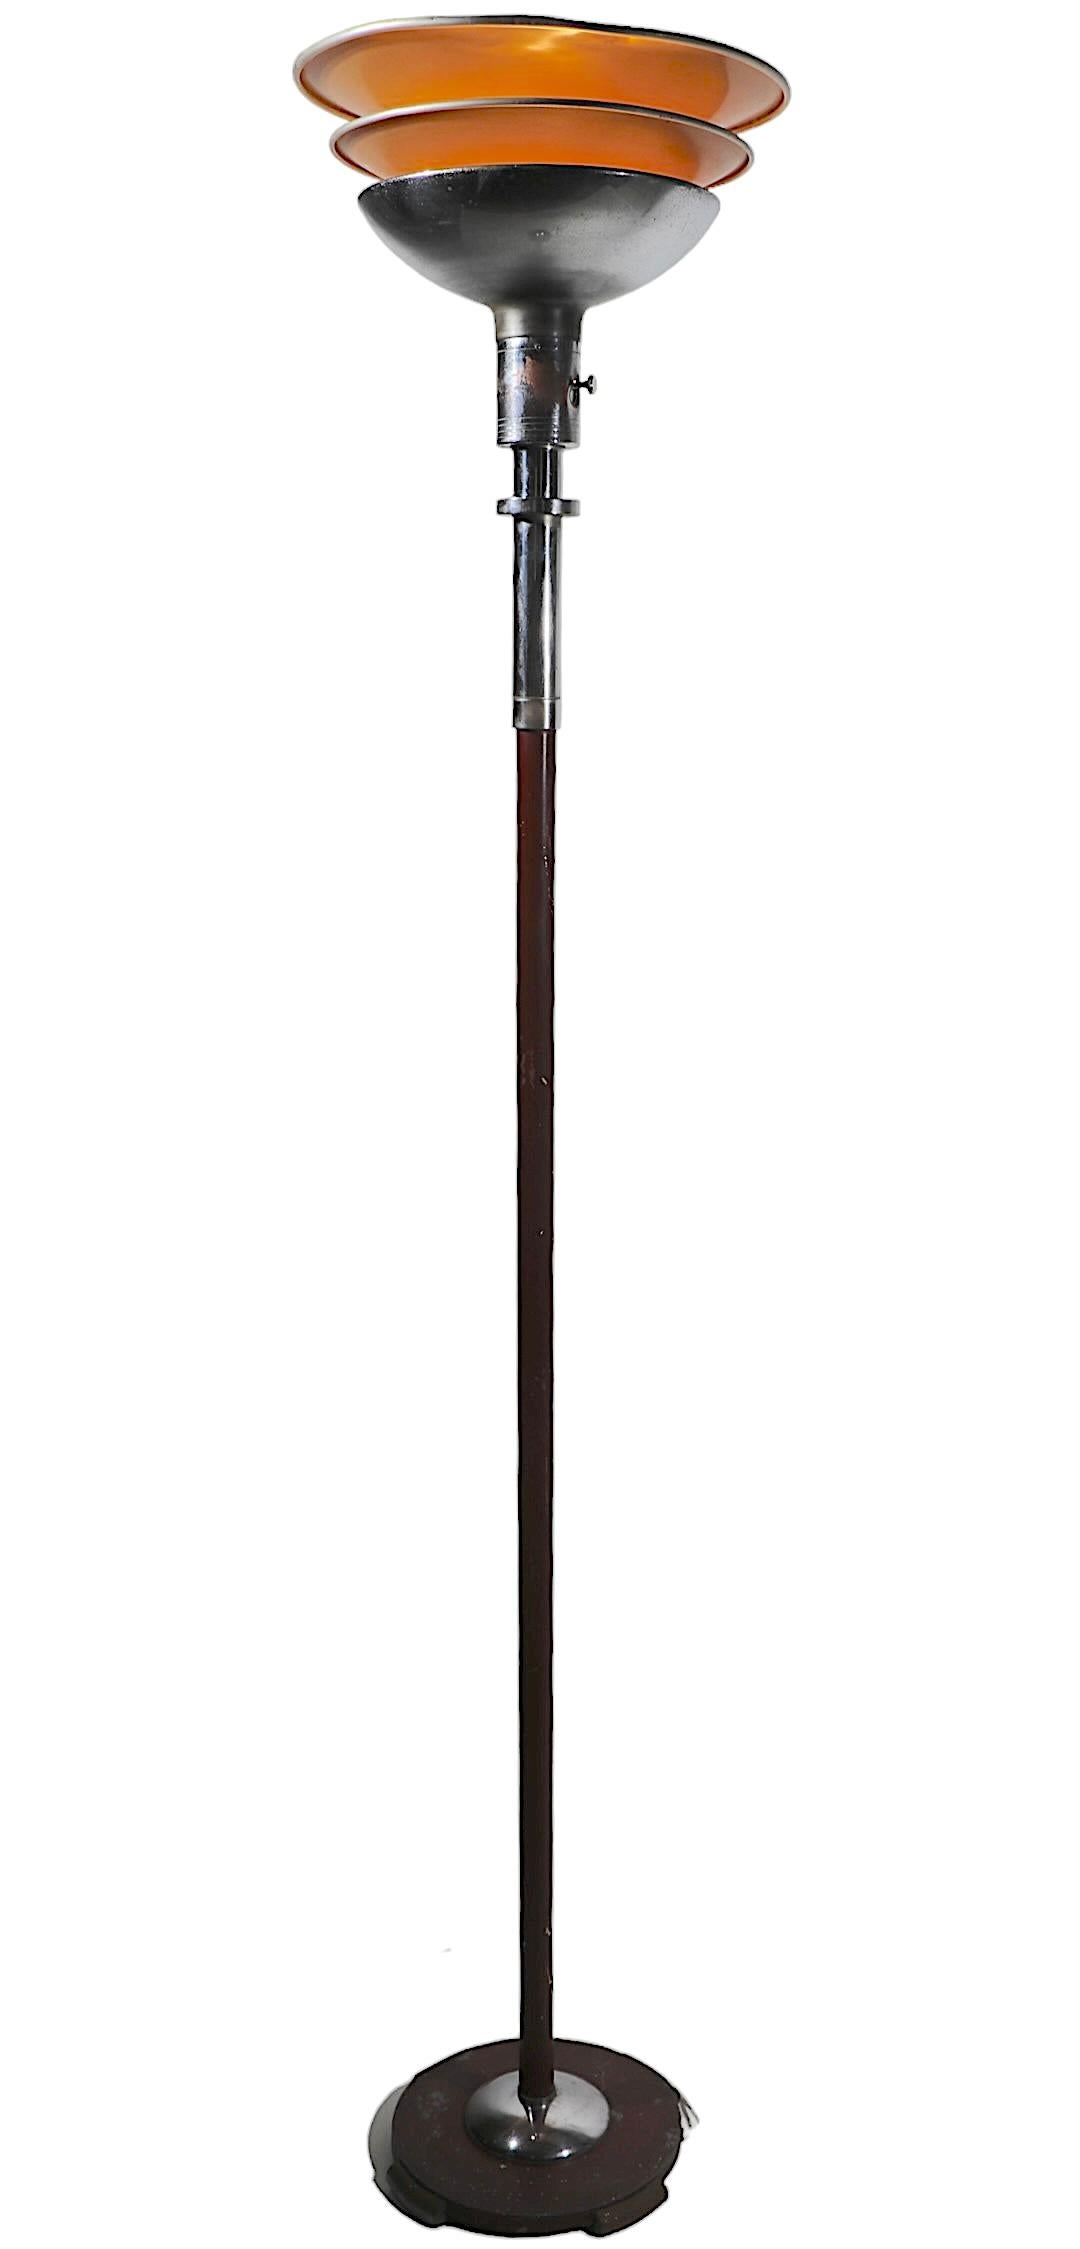 Art Deco Machine Age Torchiere  Floor Lamp by Rohde for Mutual Sunset Lamp Co.  For Sale 3